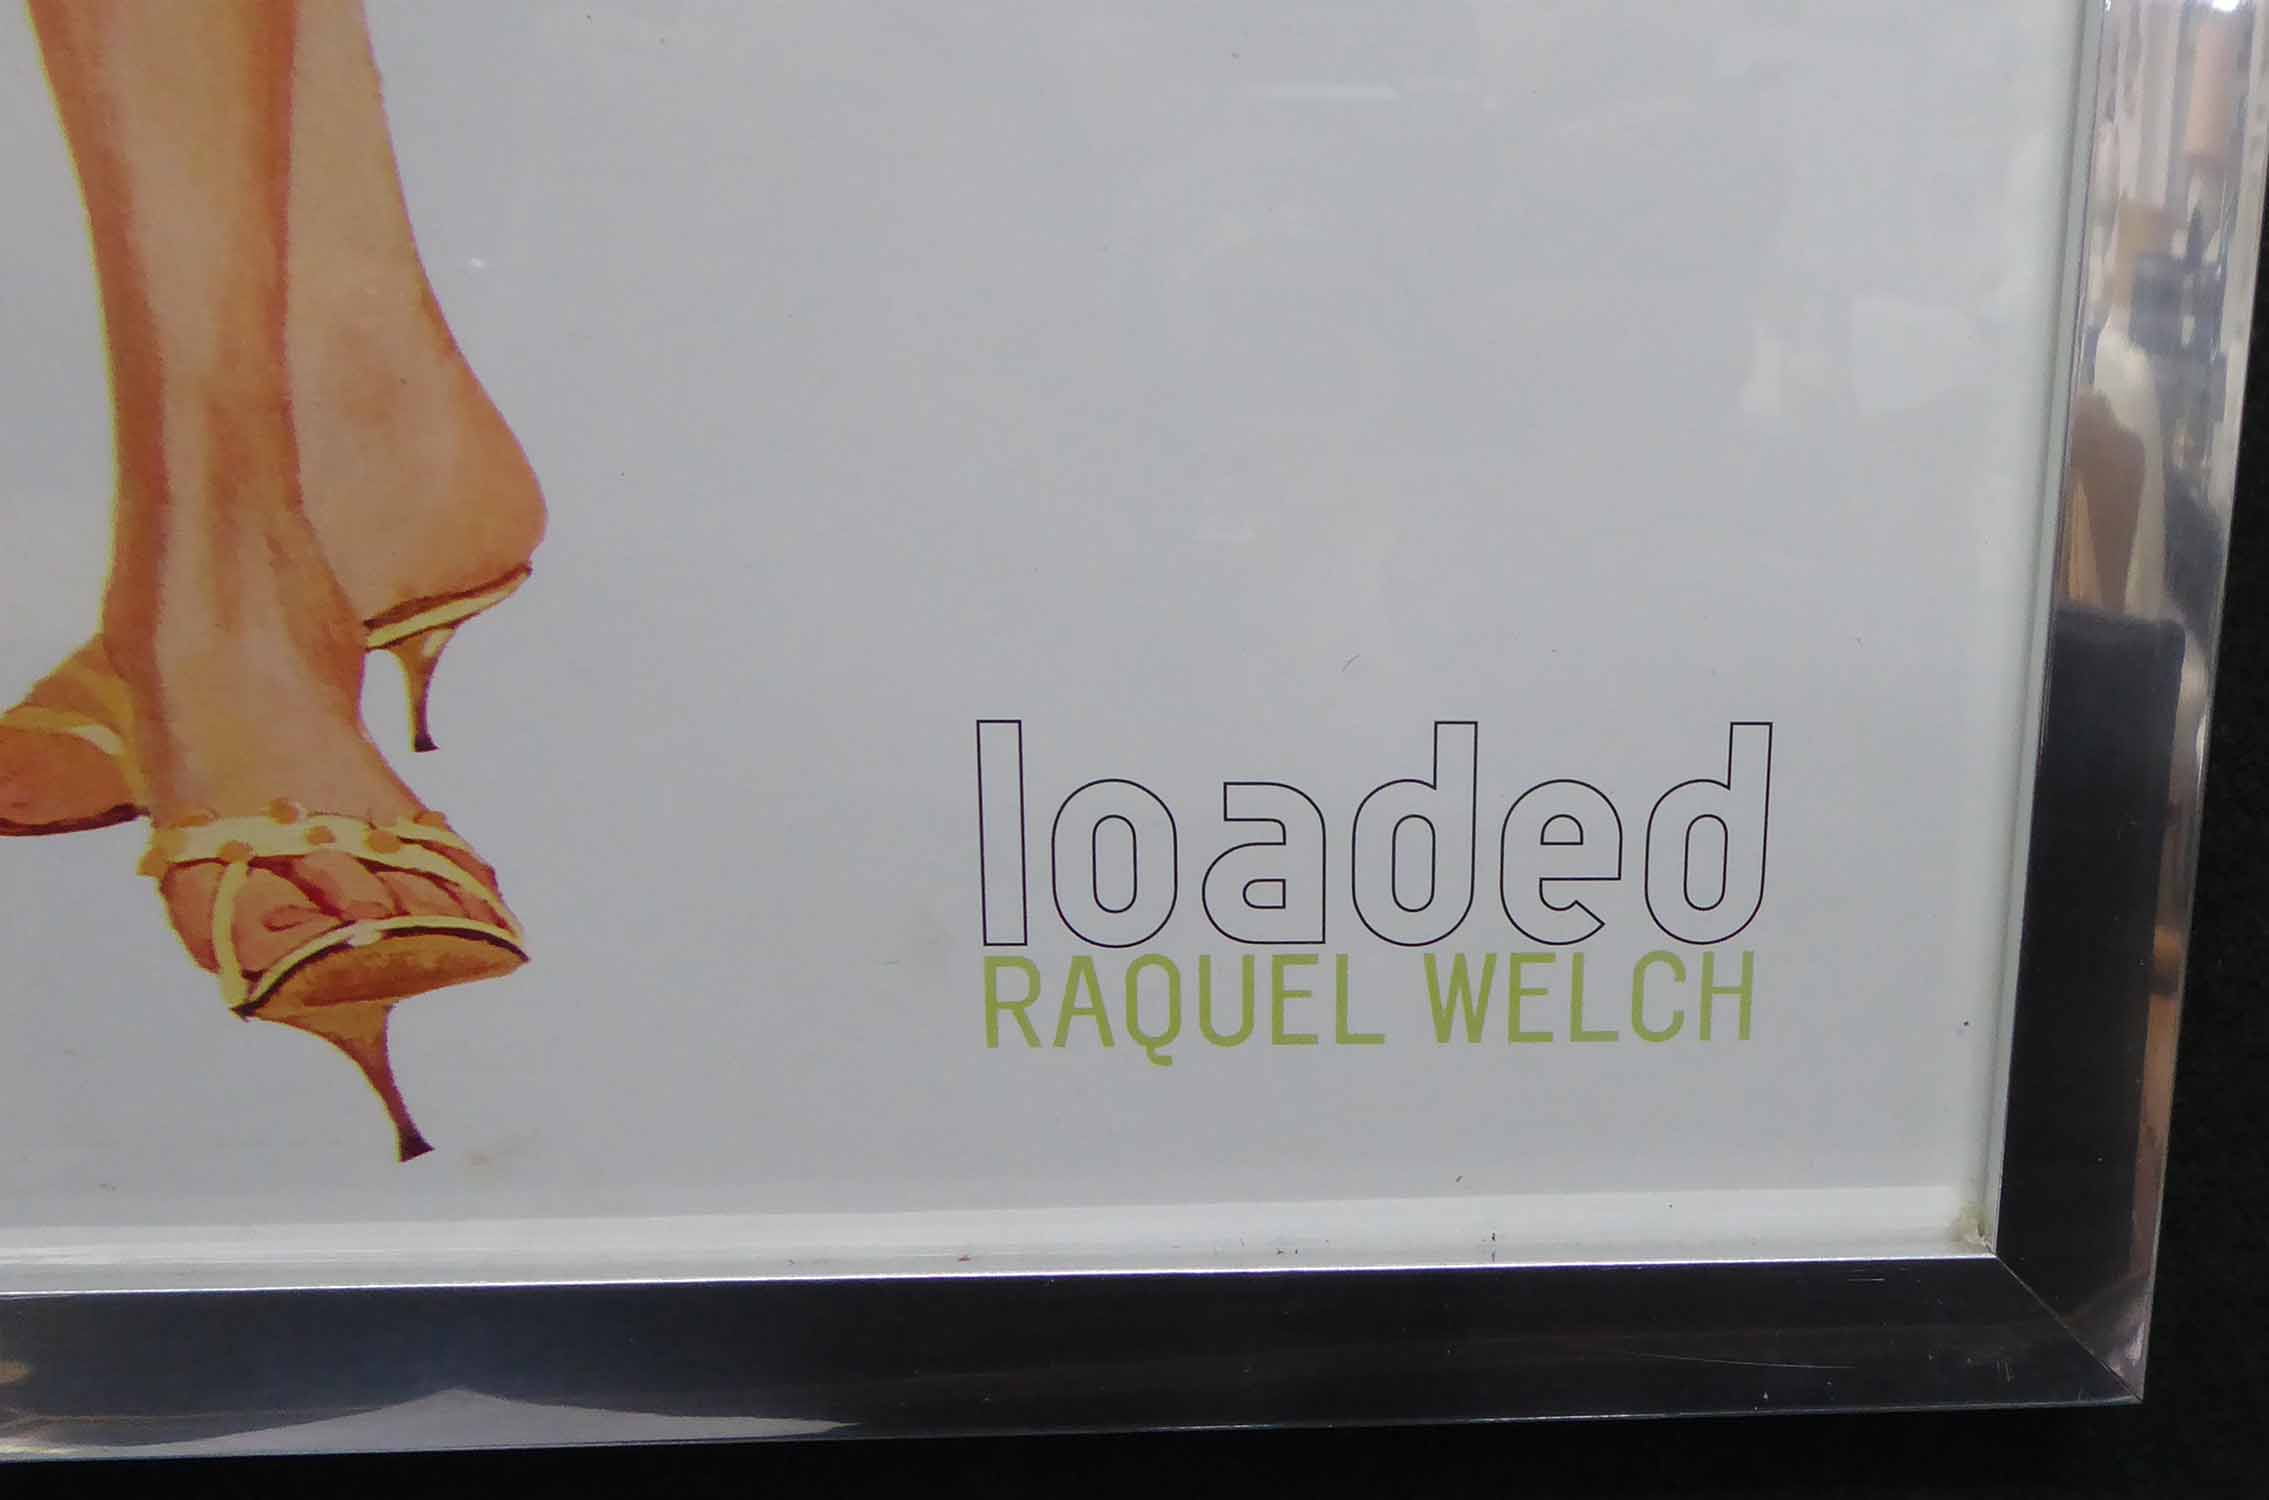 LOADED MAGAZINE RACQUEL WELCH POSTER, after Roland Corant, framed and glazed, 63.5cm x 31.5cm. - Image 2 of 4